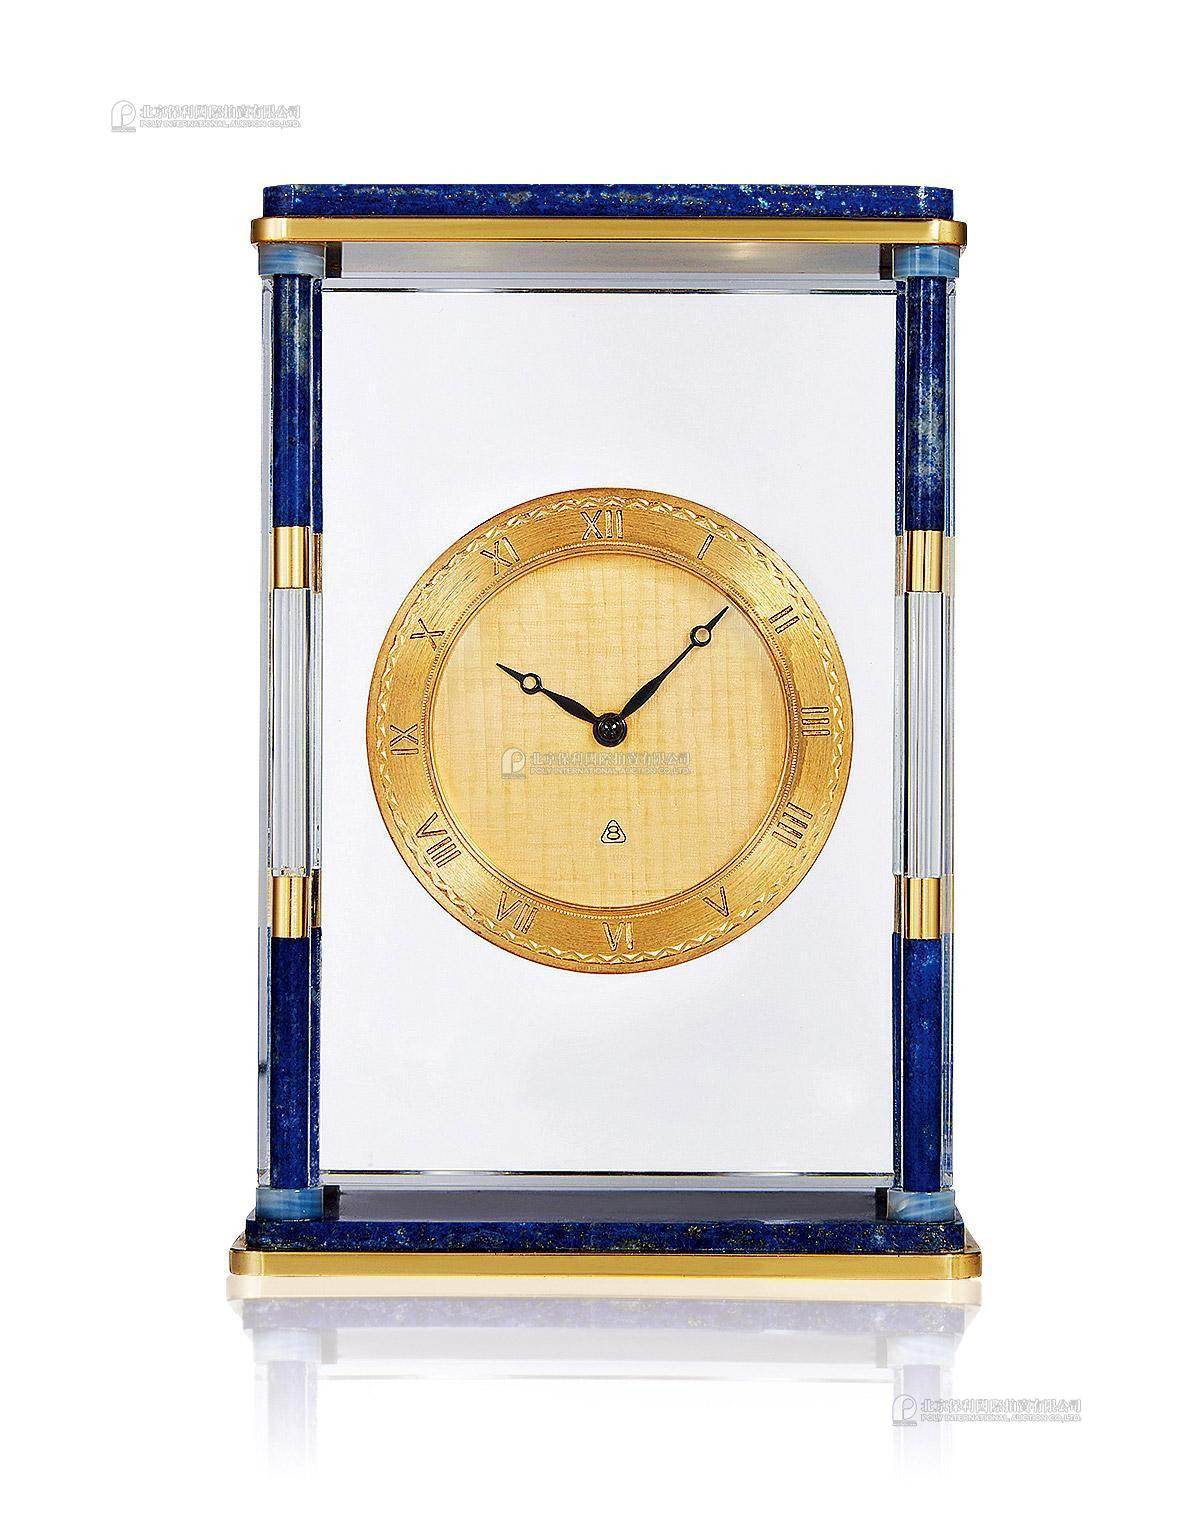 IMHOF A BRONE AND LAZURITE MANUALLY-WOUND TABLE CLOCK WITH 8 DAYS POWER RESERVE